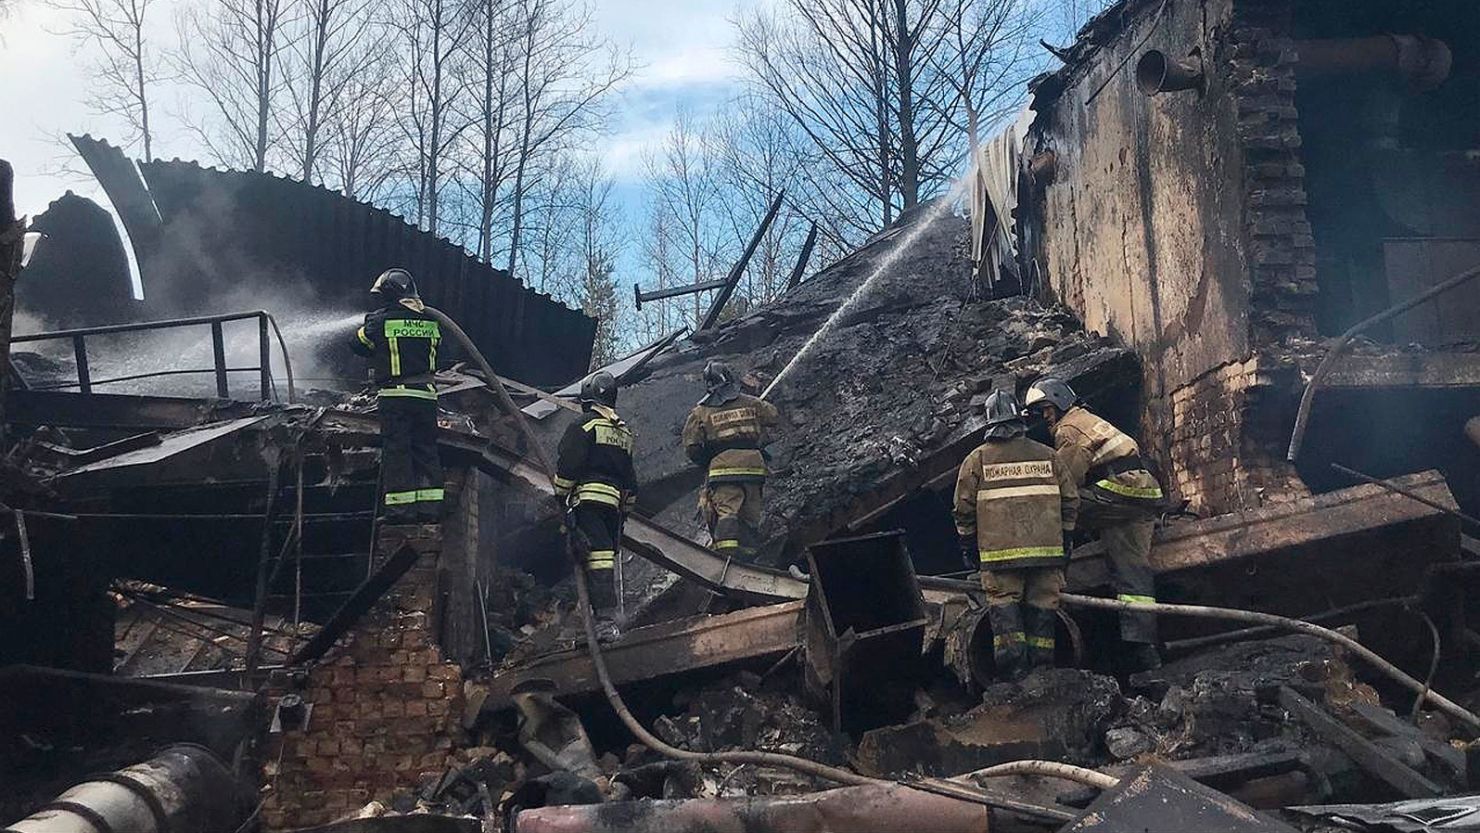 Russian officials released this photo of emergency personnel working at the site of an explosion and fire at a gunpowder factory in the Ryazan region, Russia, on Friday.